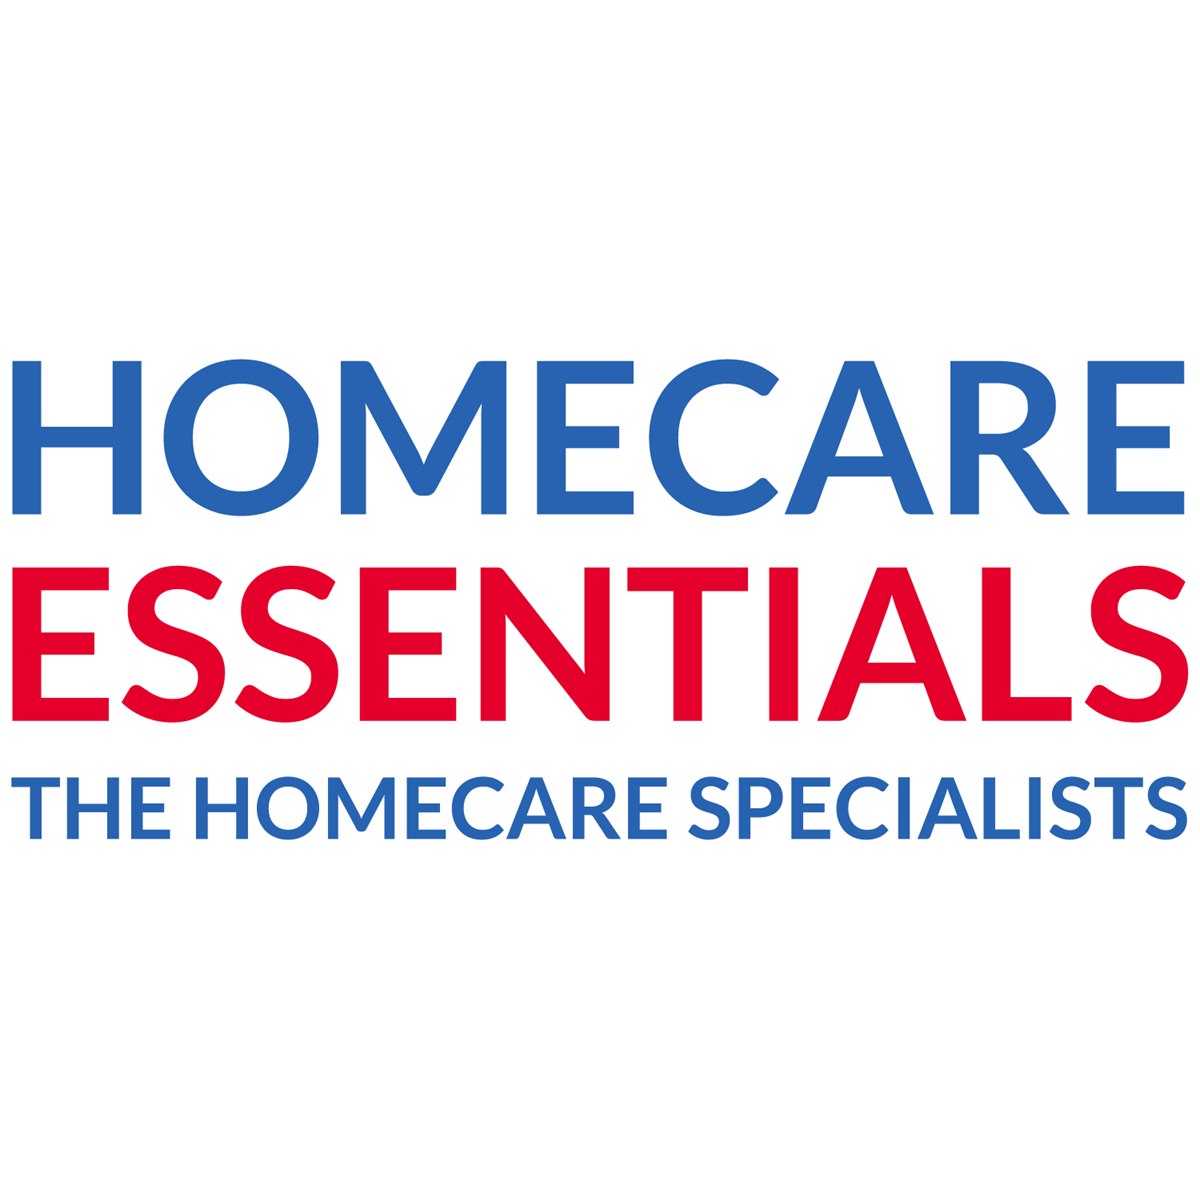 Homecare Essentials Products